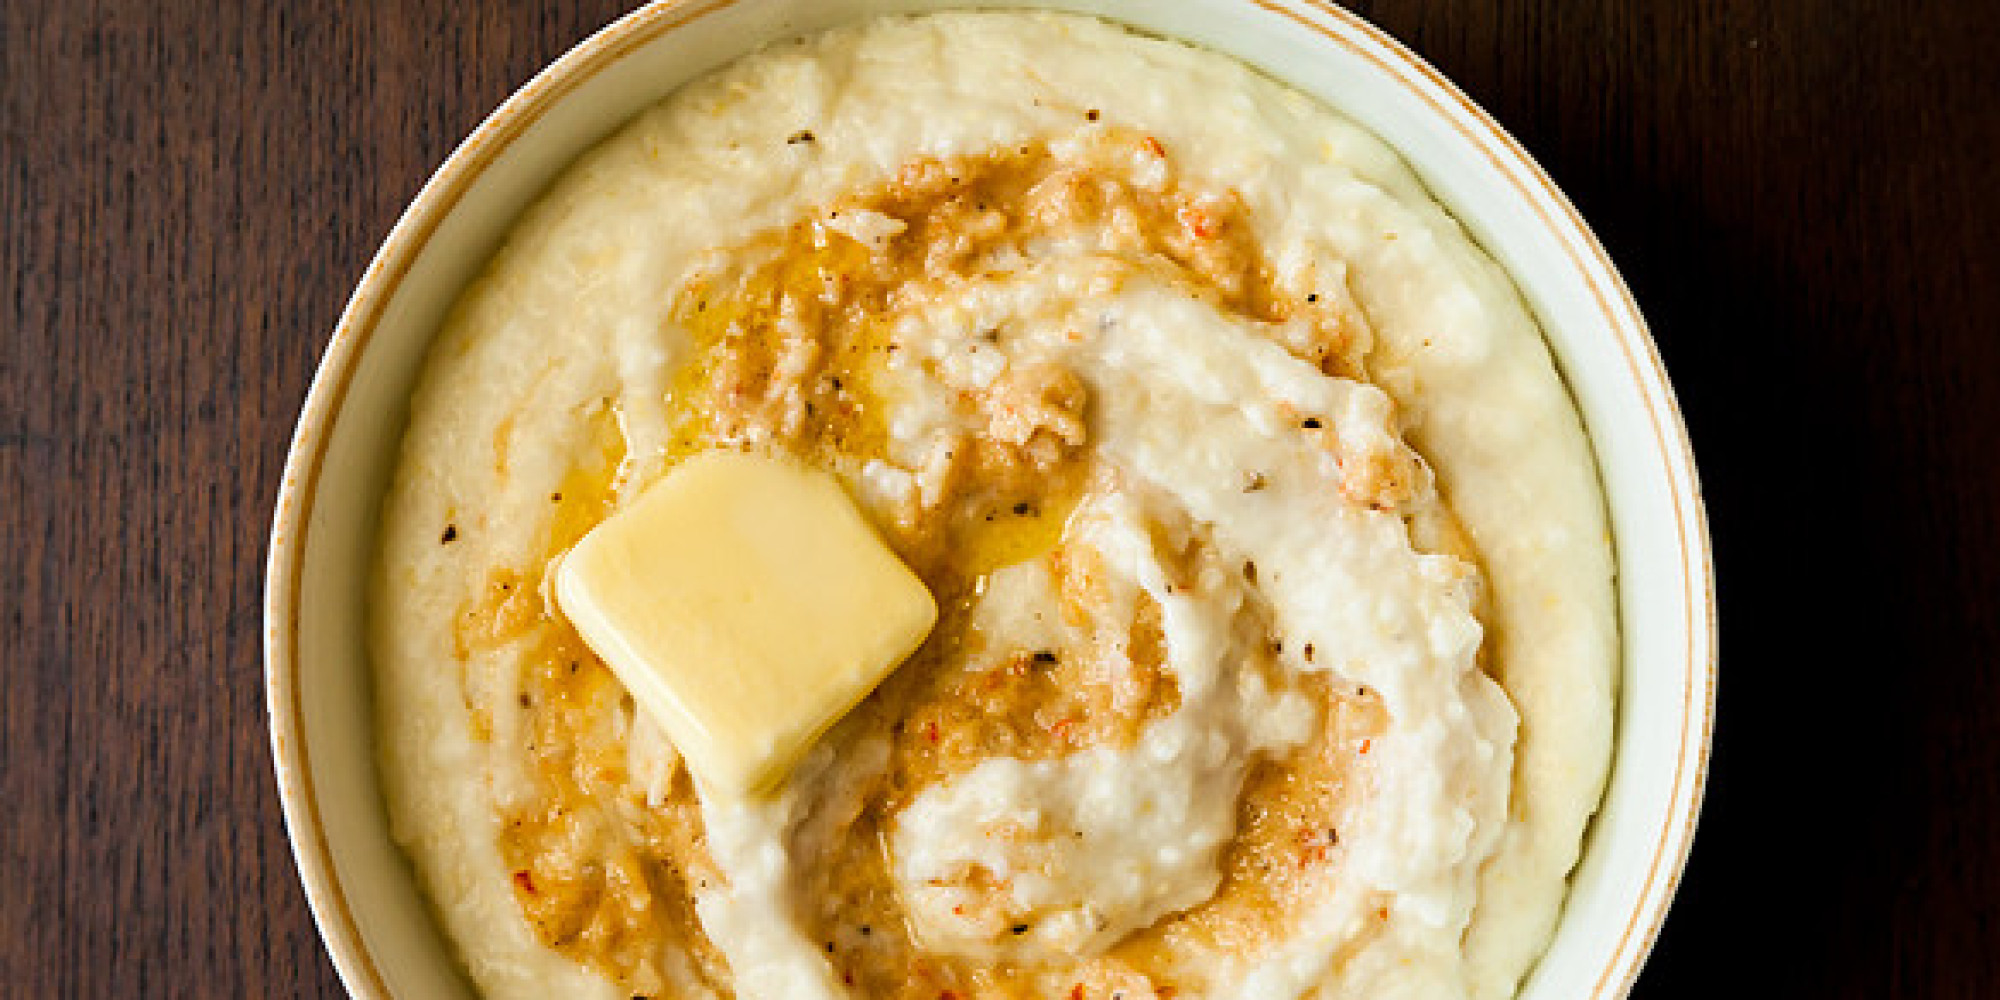 Grits Recipes Aren't Just For Breakfast Anymore (PHOTOS)2000 x 1000